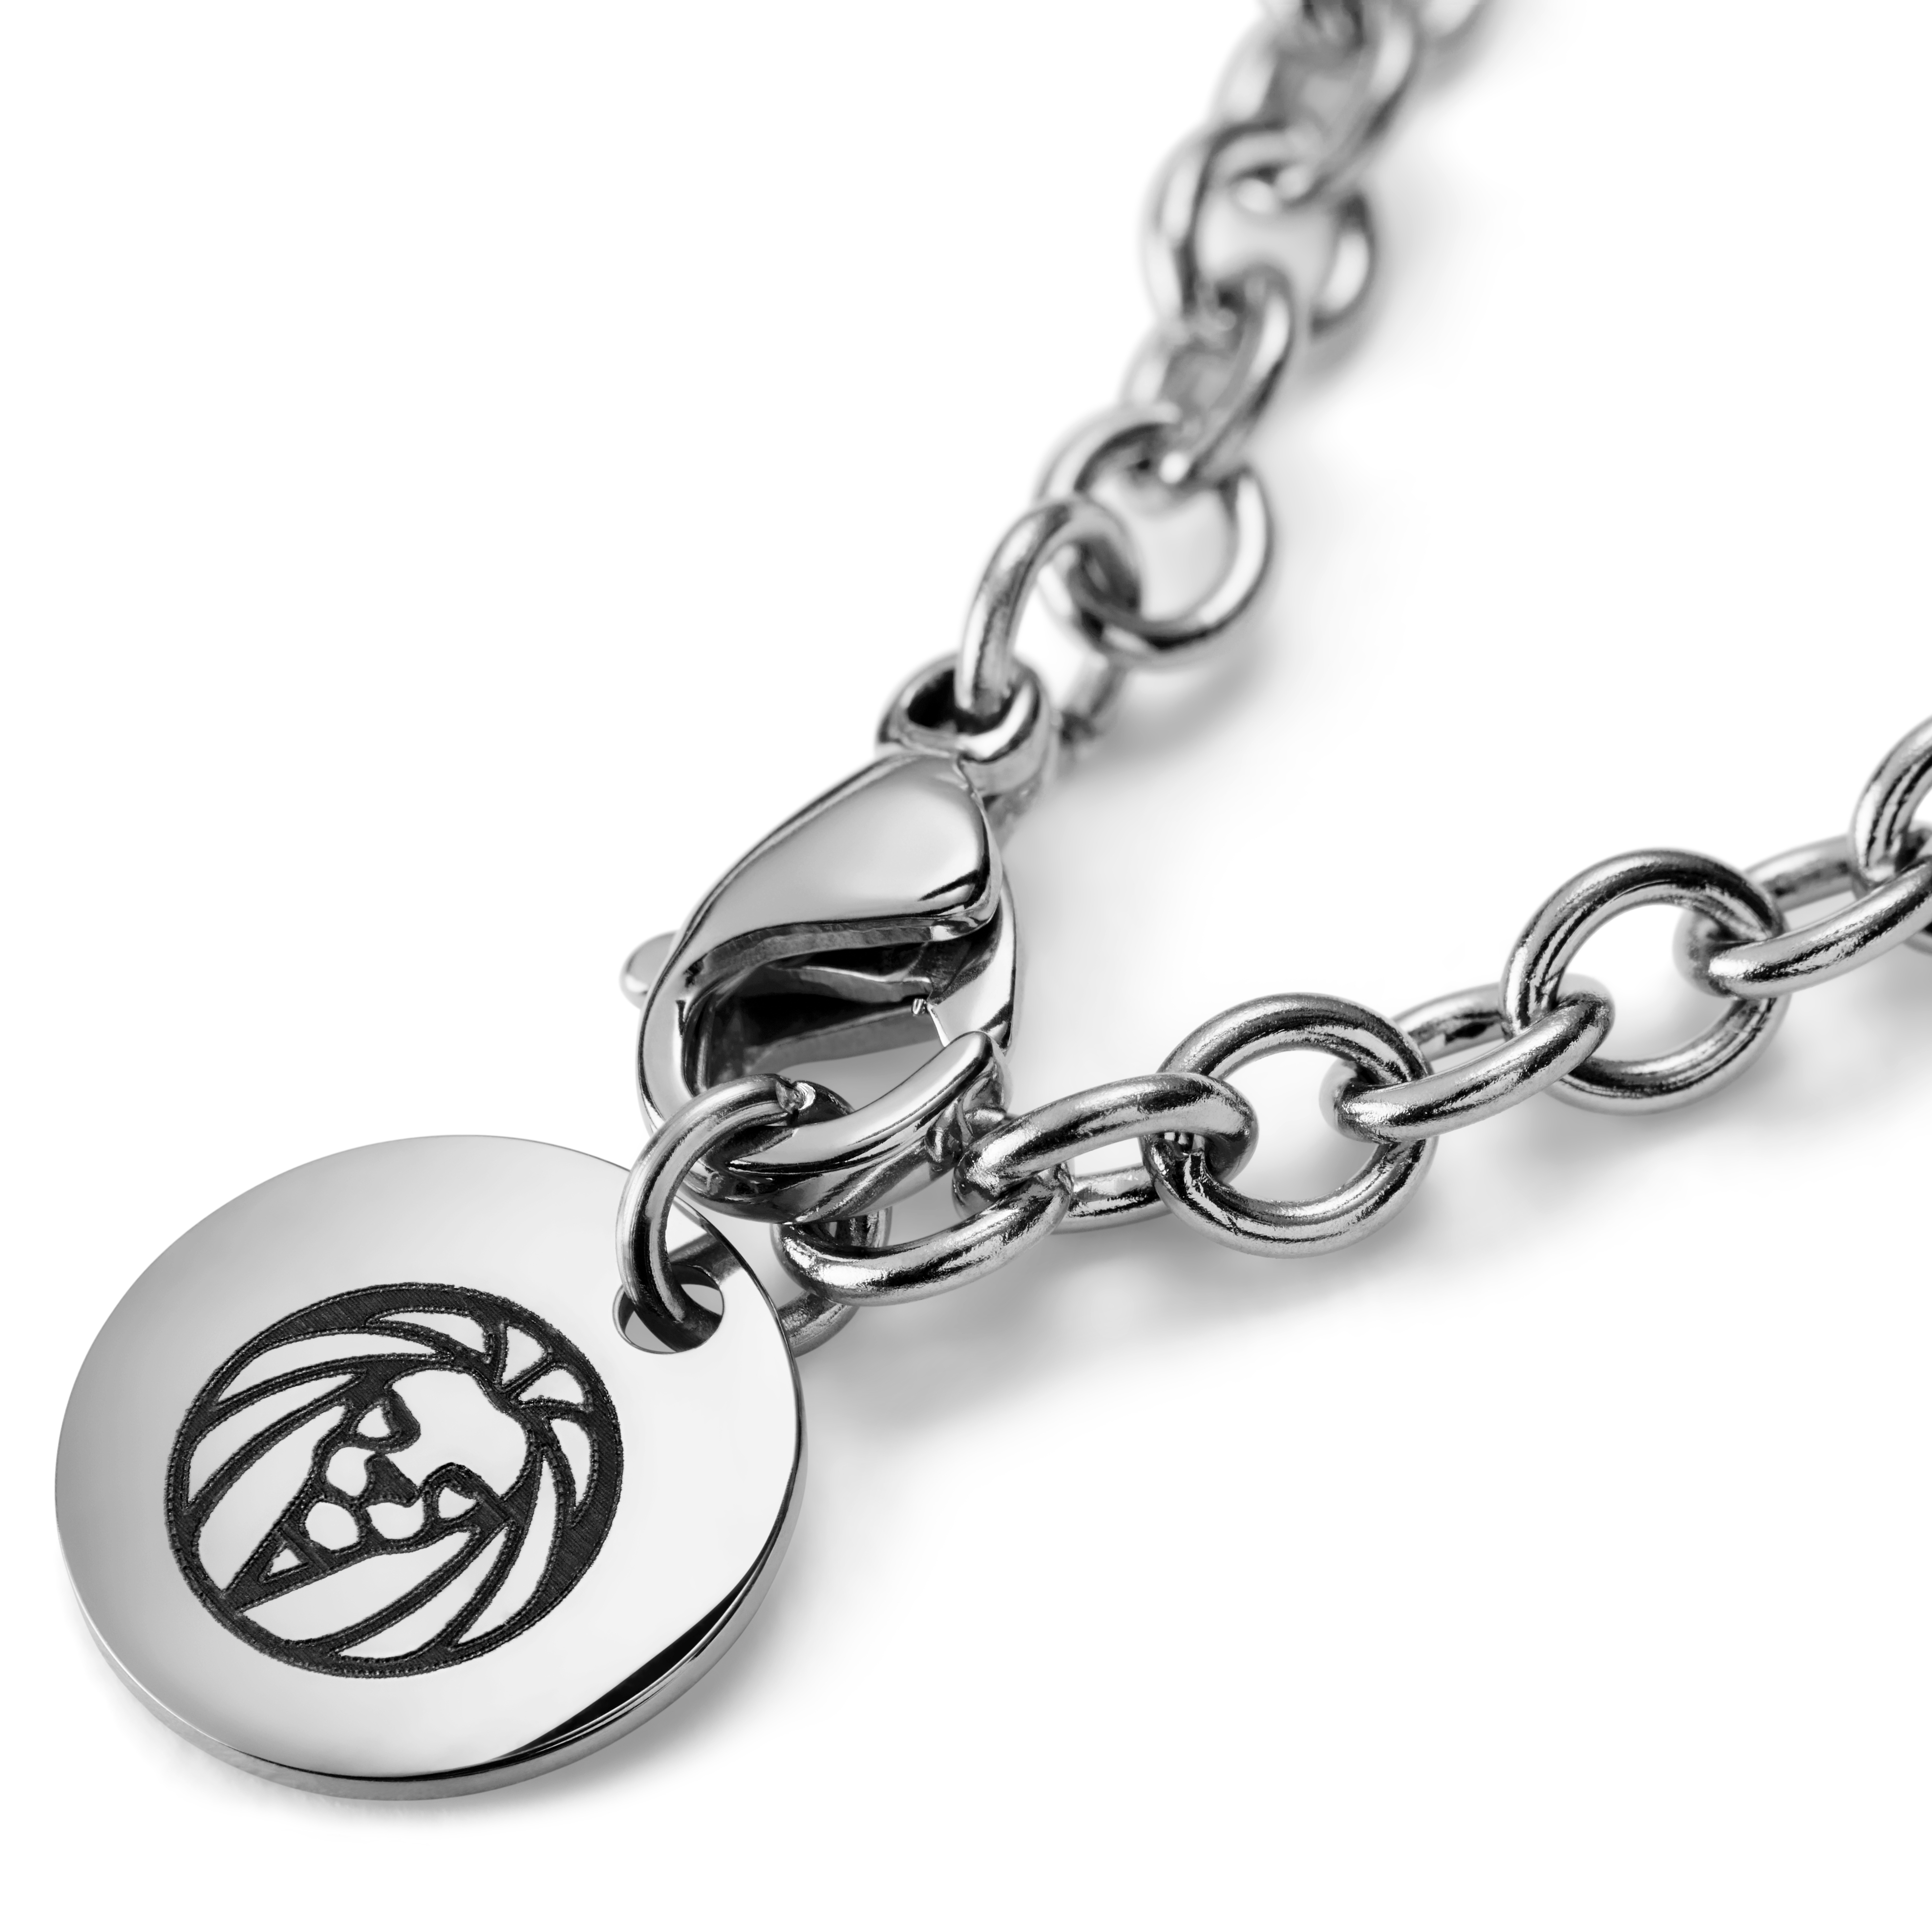 Engravable Silver-Tone Stainless Steel with ID Dog Tag Cable Chain Necklace - for Men - Lucleon